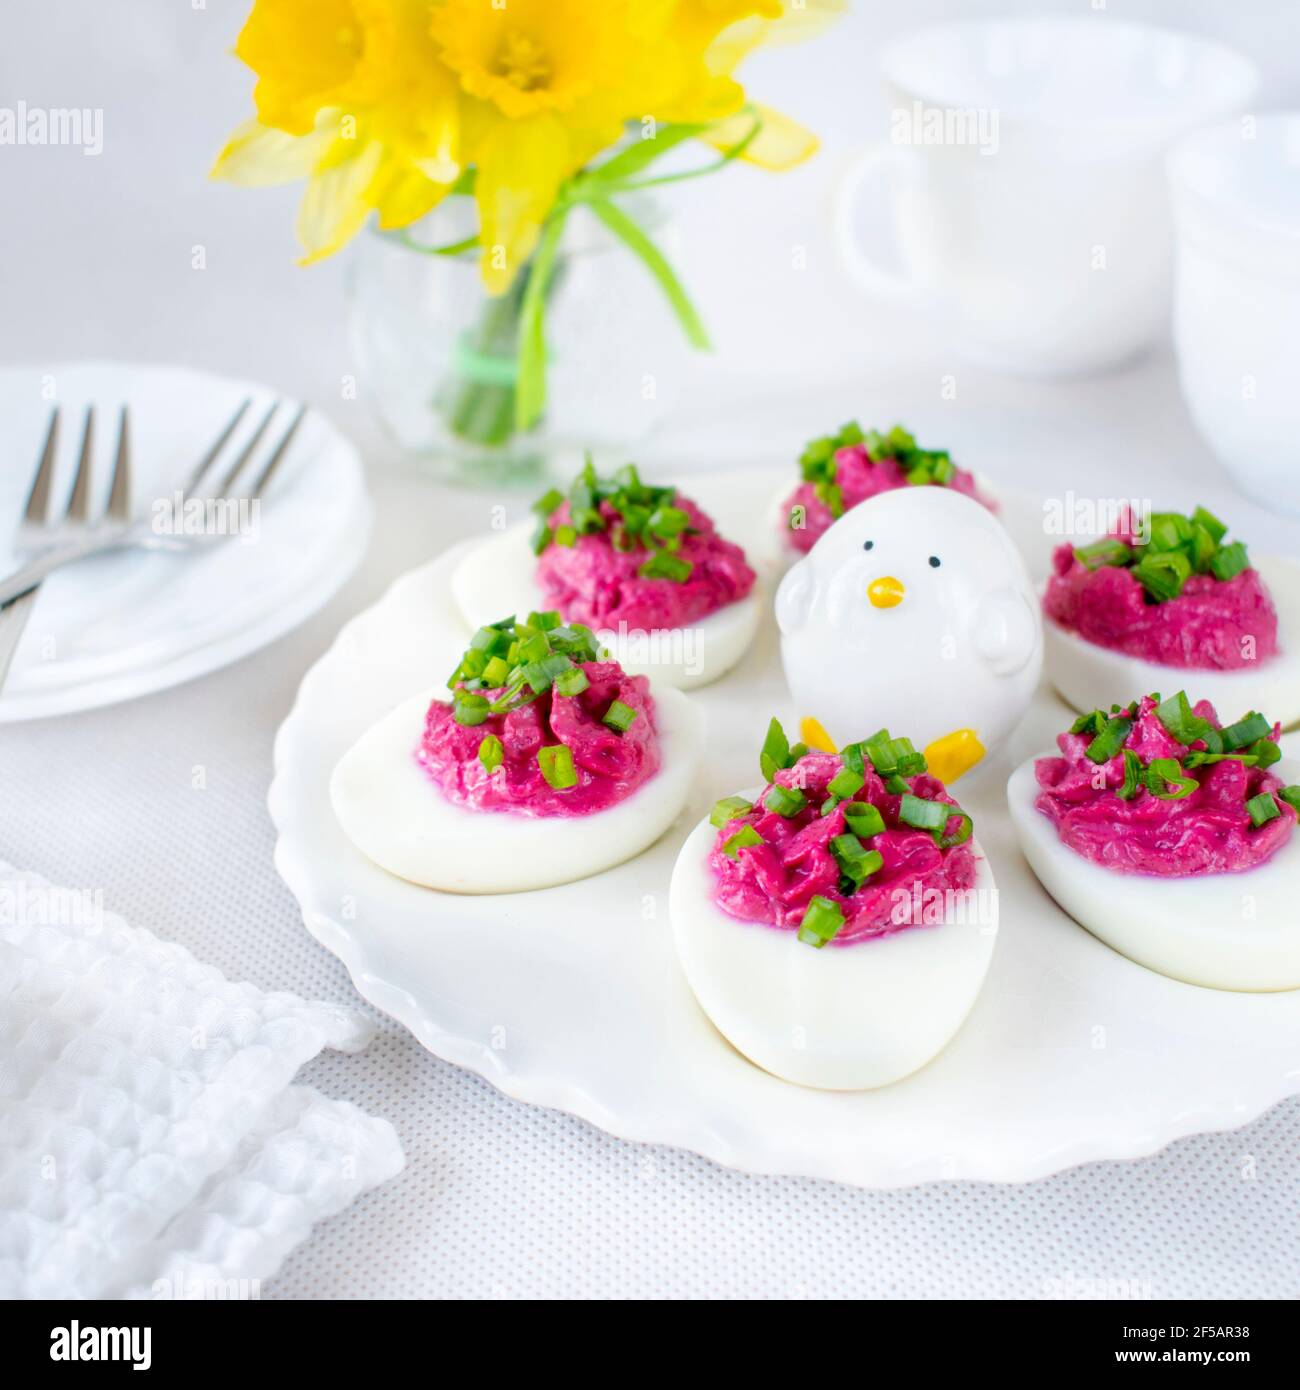 Boiled eggs stuffed with beetroot paste and sprinkled with chives. Stock Photo